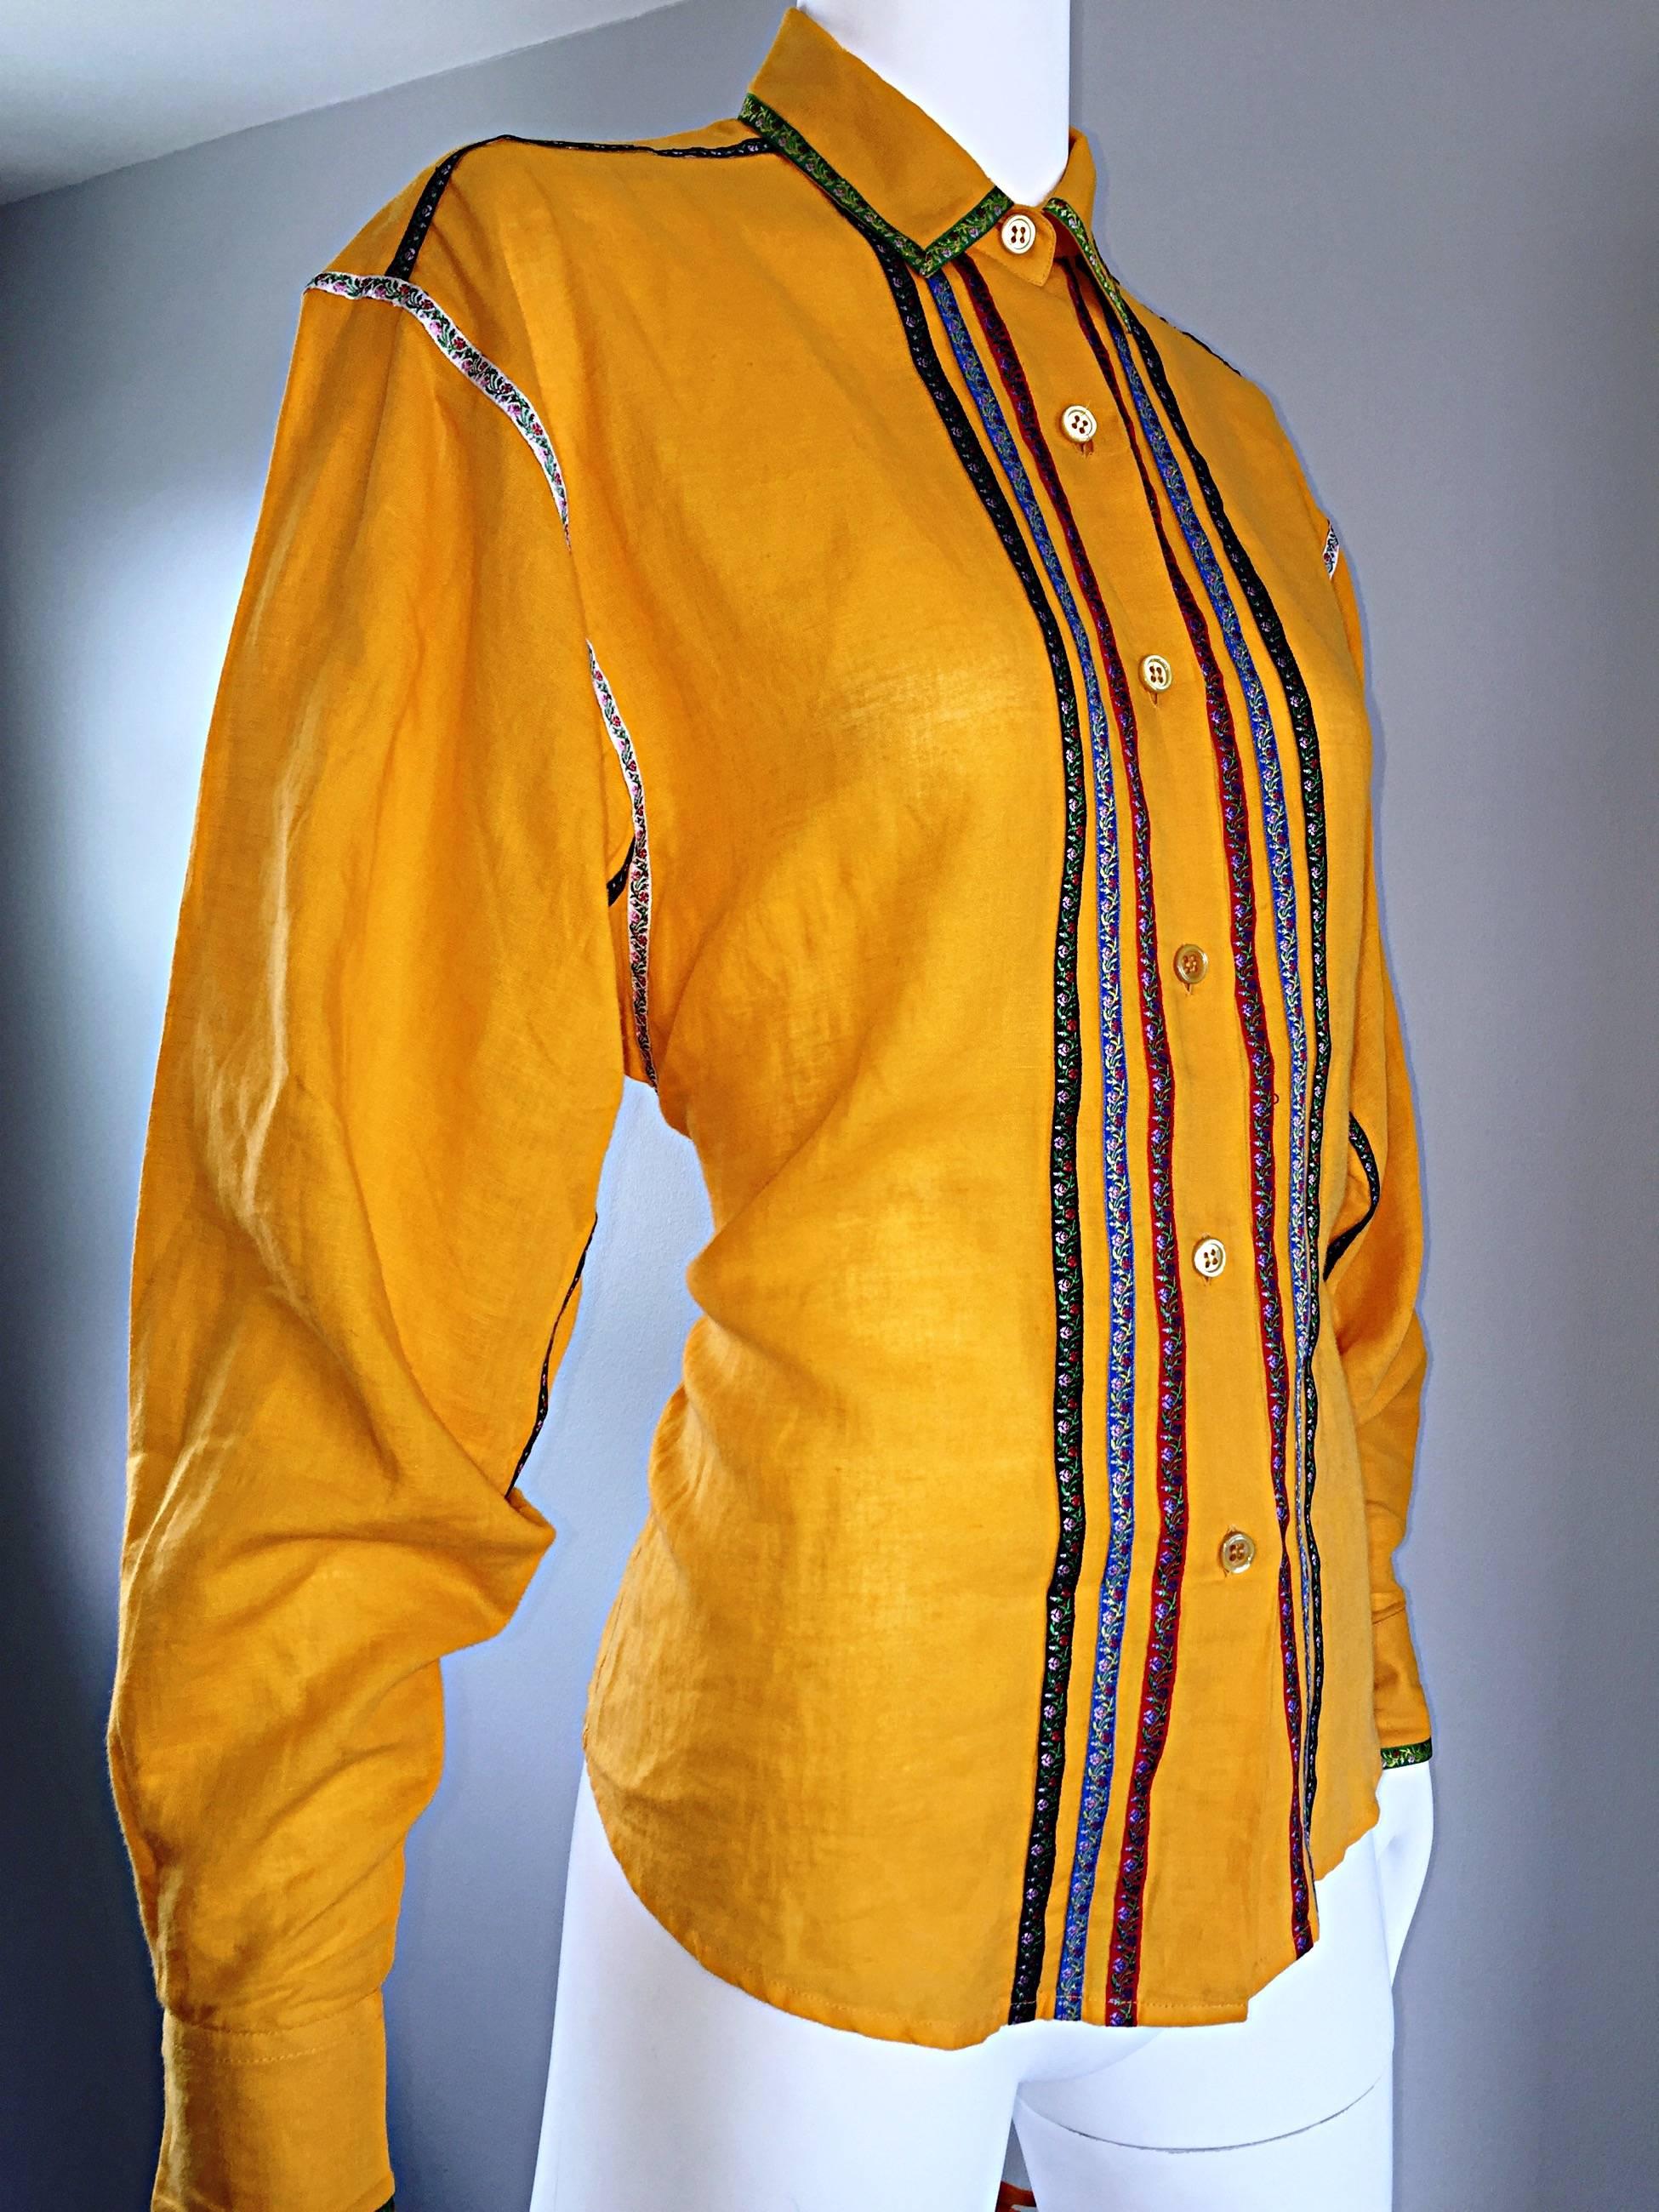 Vintage Kenzo 1990s Marigold Yellow German Inspired Linen + Cotton Blouse Top For Sale 4